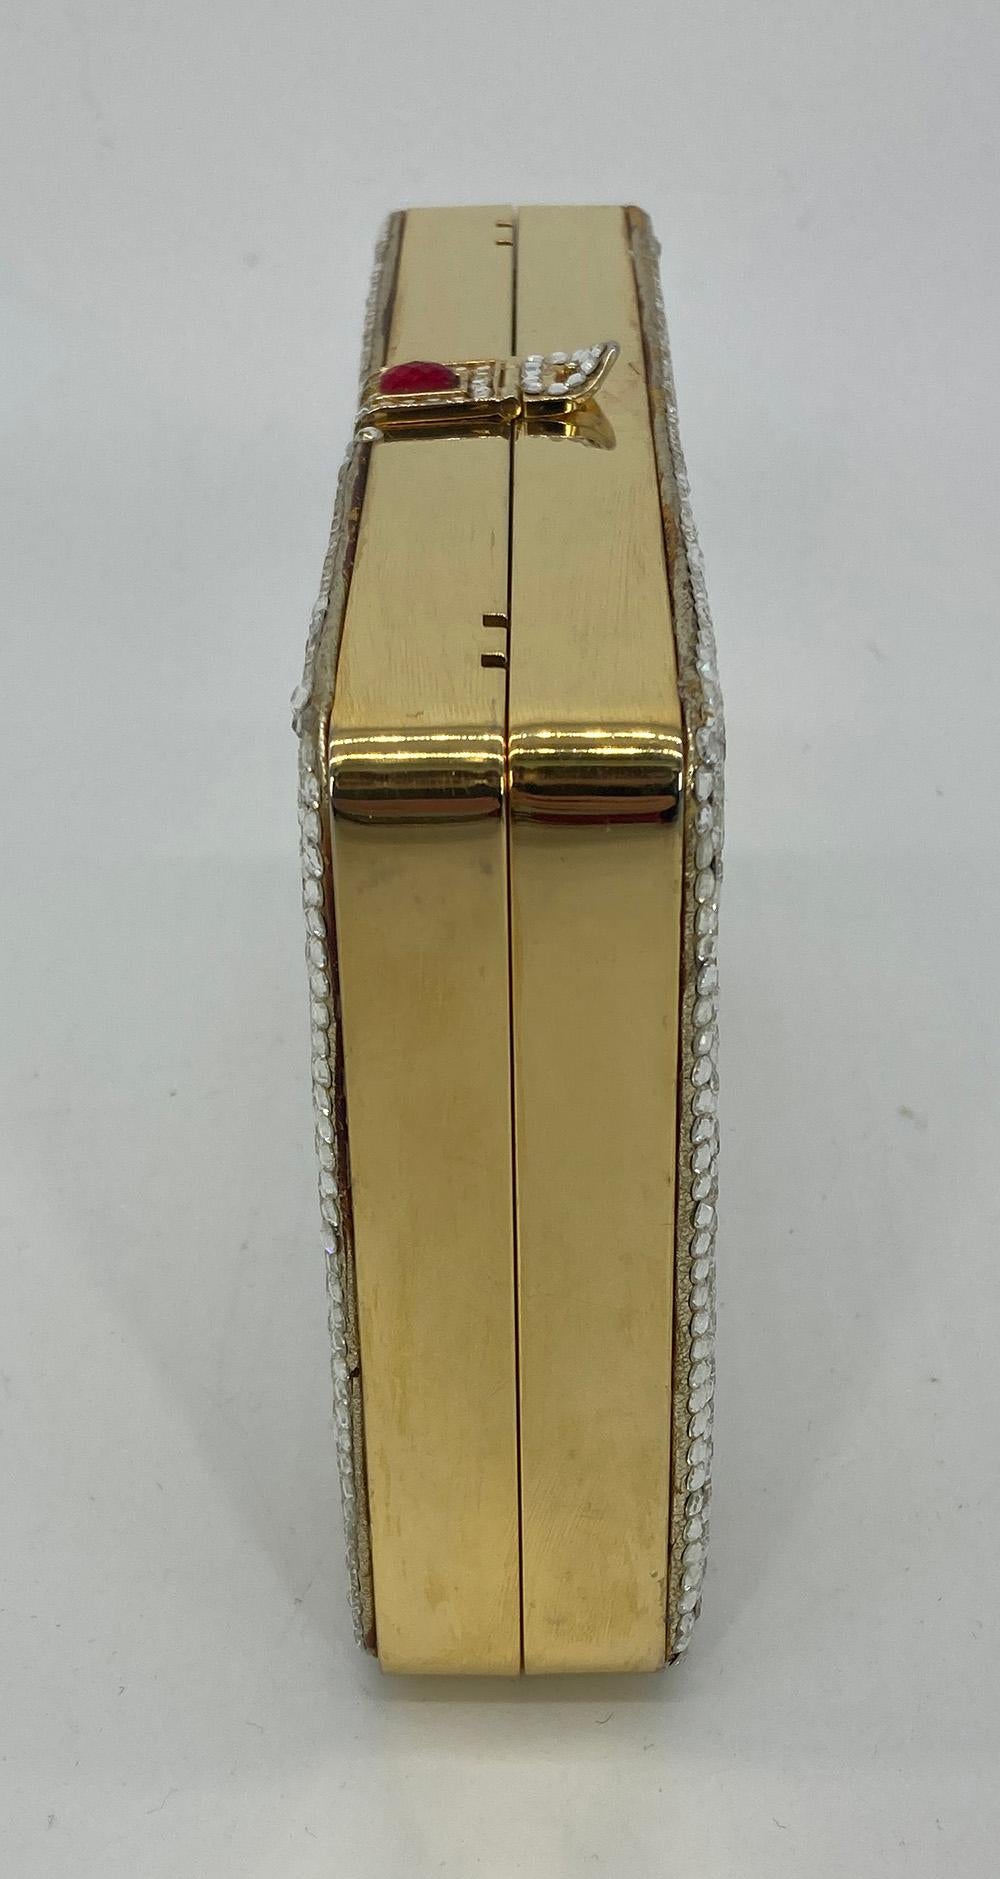 Judith Leiber Crystal Briefcase Minaudiere in good condition. Clear crystals over leather base trimmed with gold hardware. Top lift latch closure with red stone. gold leather interior with attached chain shoulder strap. Overall good condition with